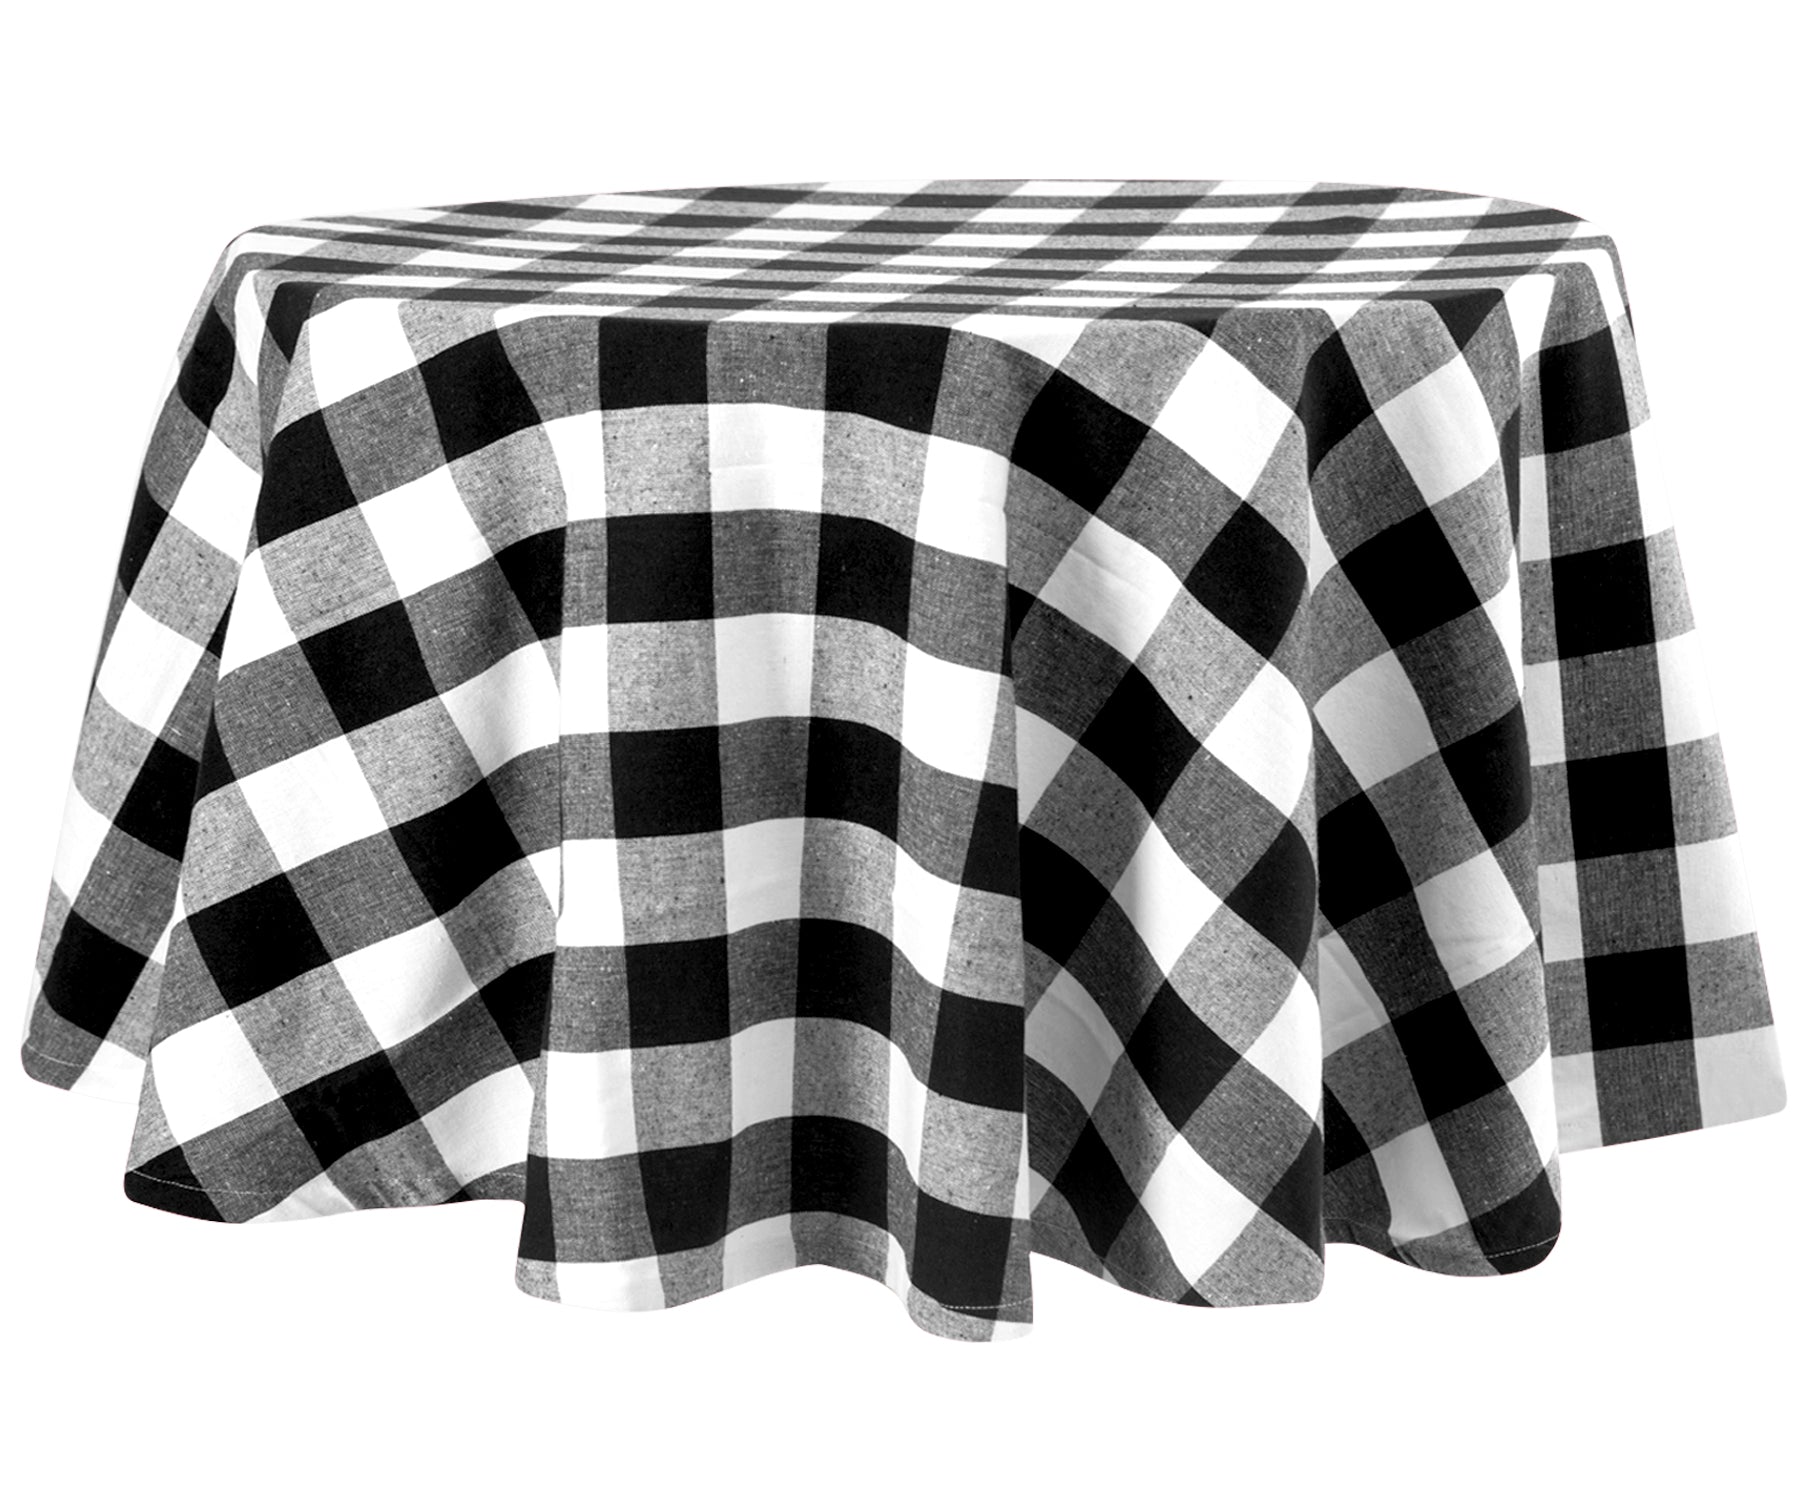 Round cloth tablecloths, available in various designs, offer a variety of options to suit your unique style.